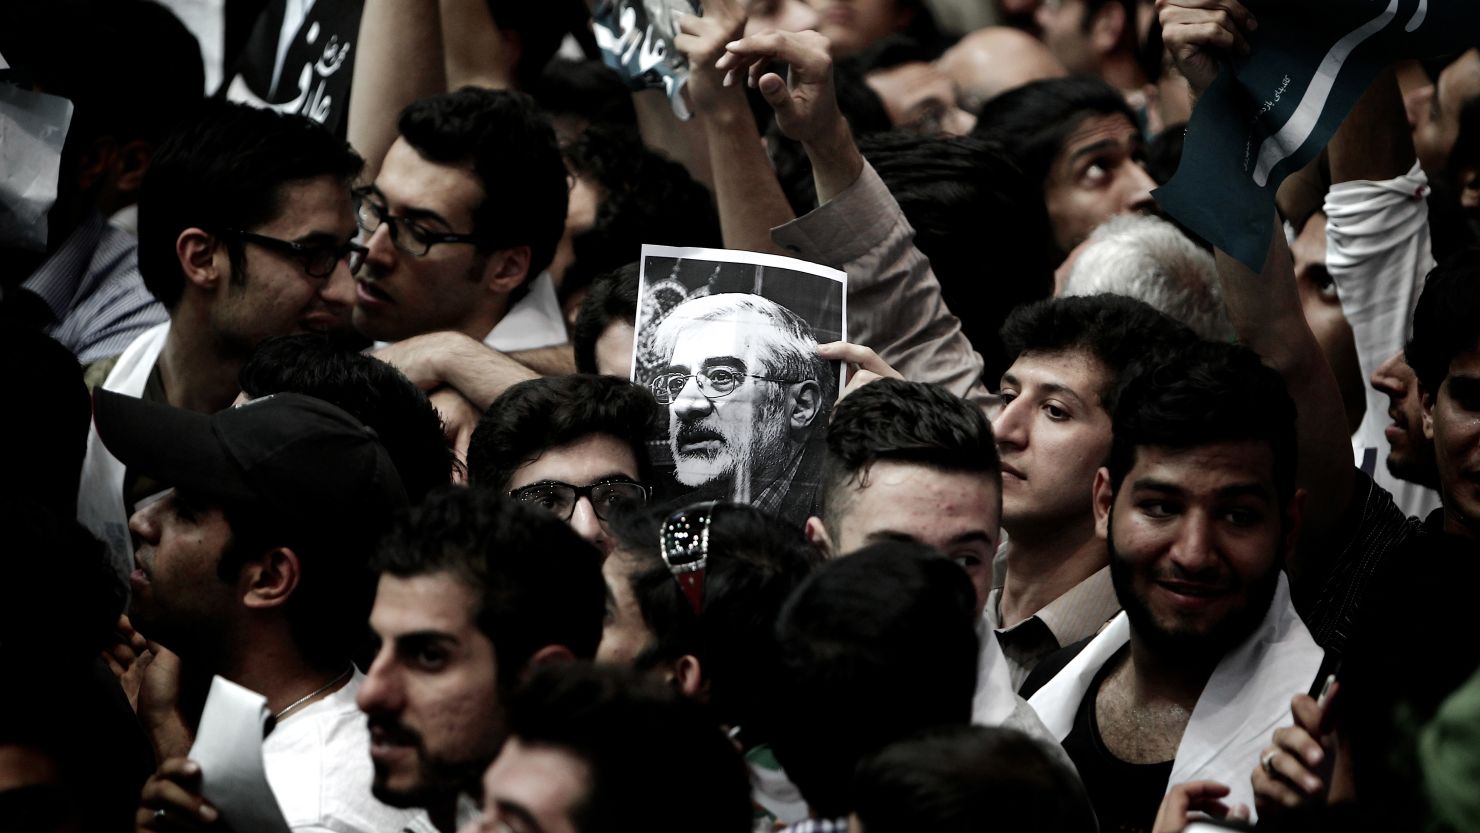 A portrait of opposition leader Mir Hossein Mousavi is held during a campaign rally in Tehran on June 10, 2013.